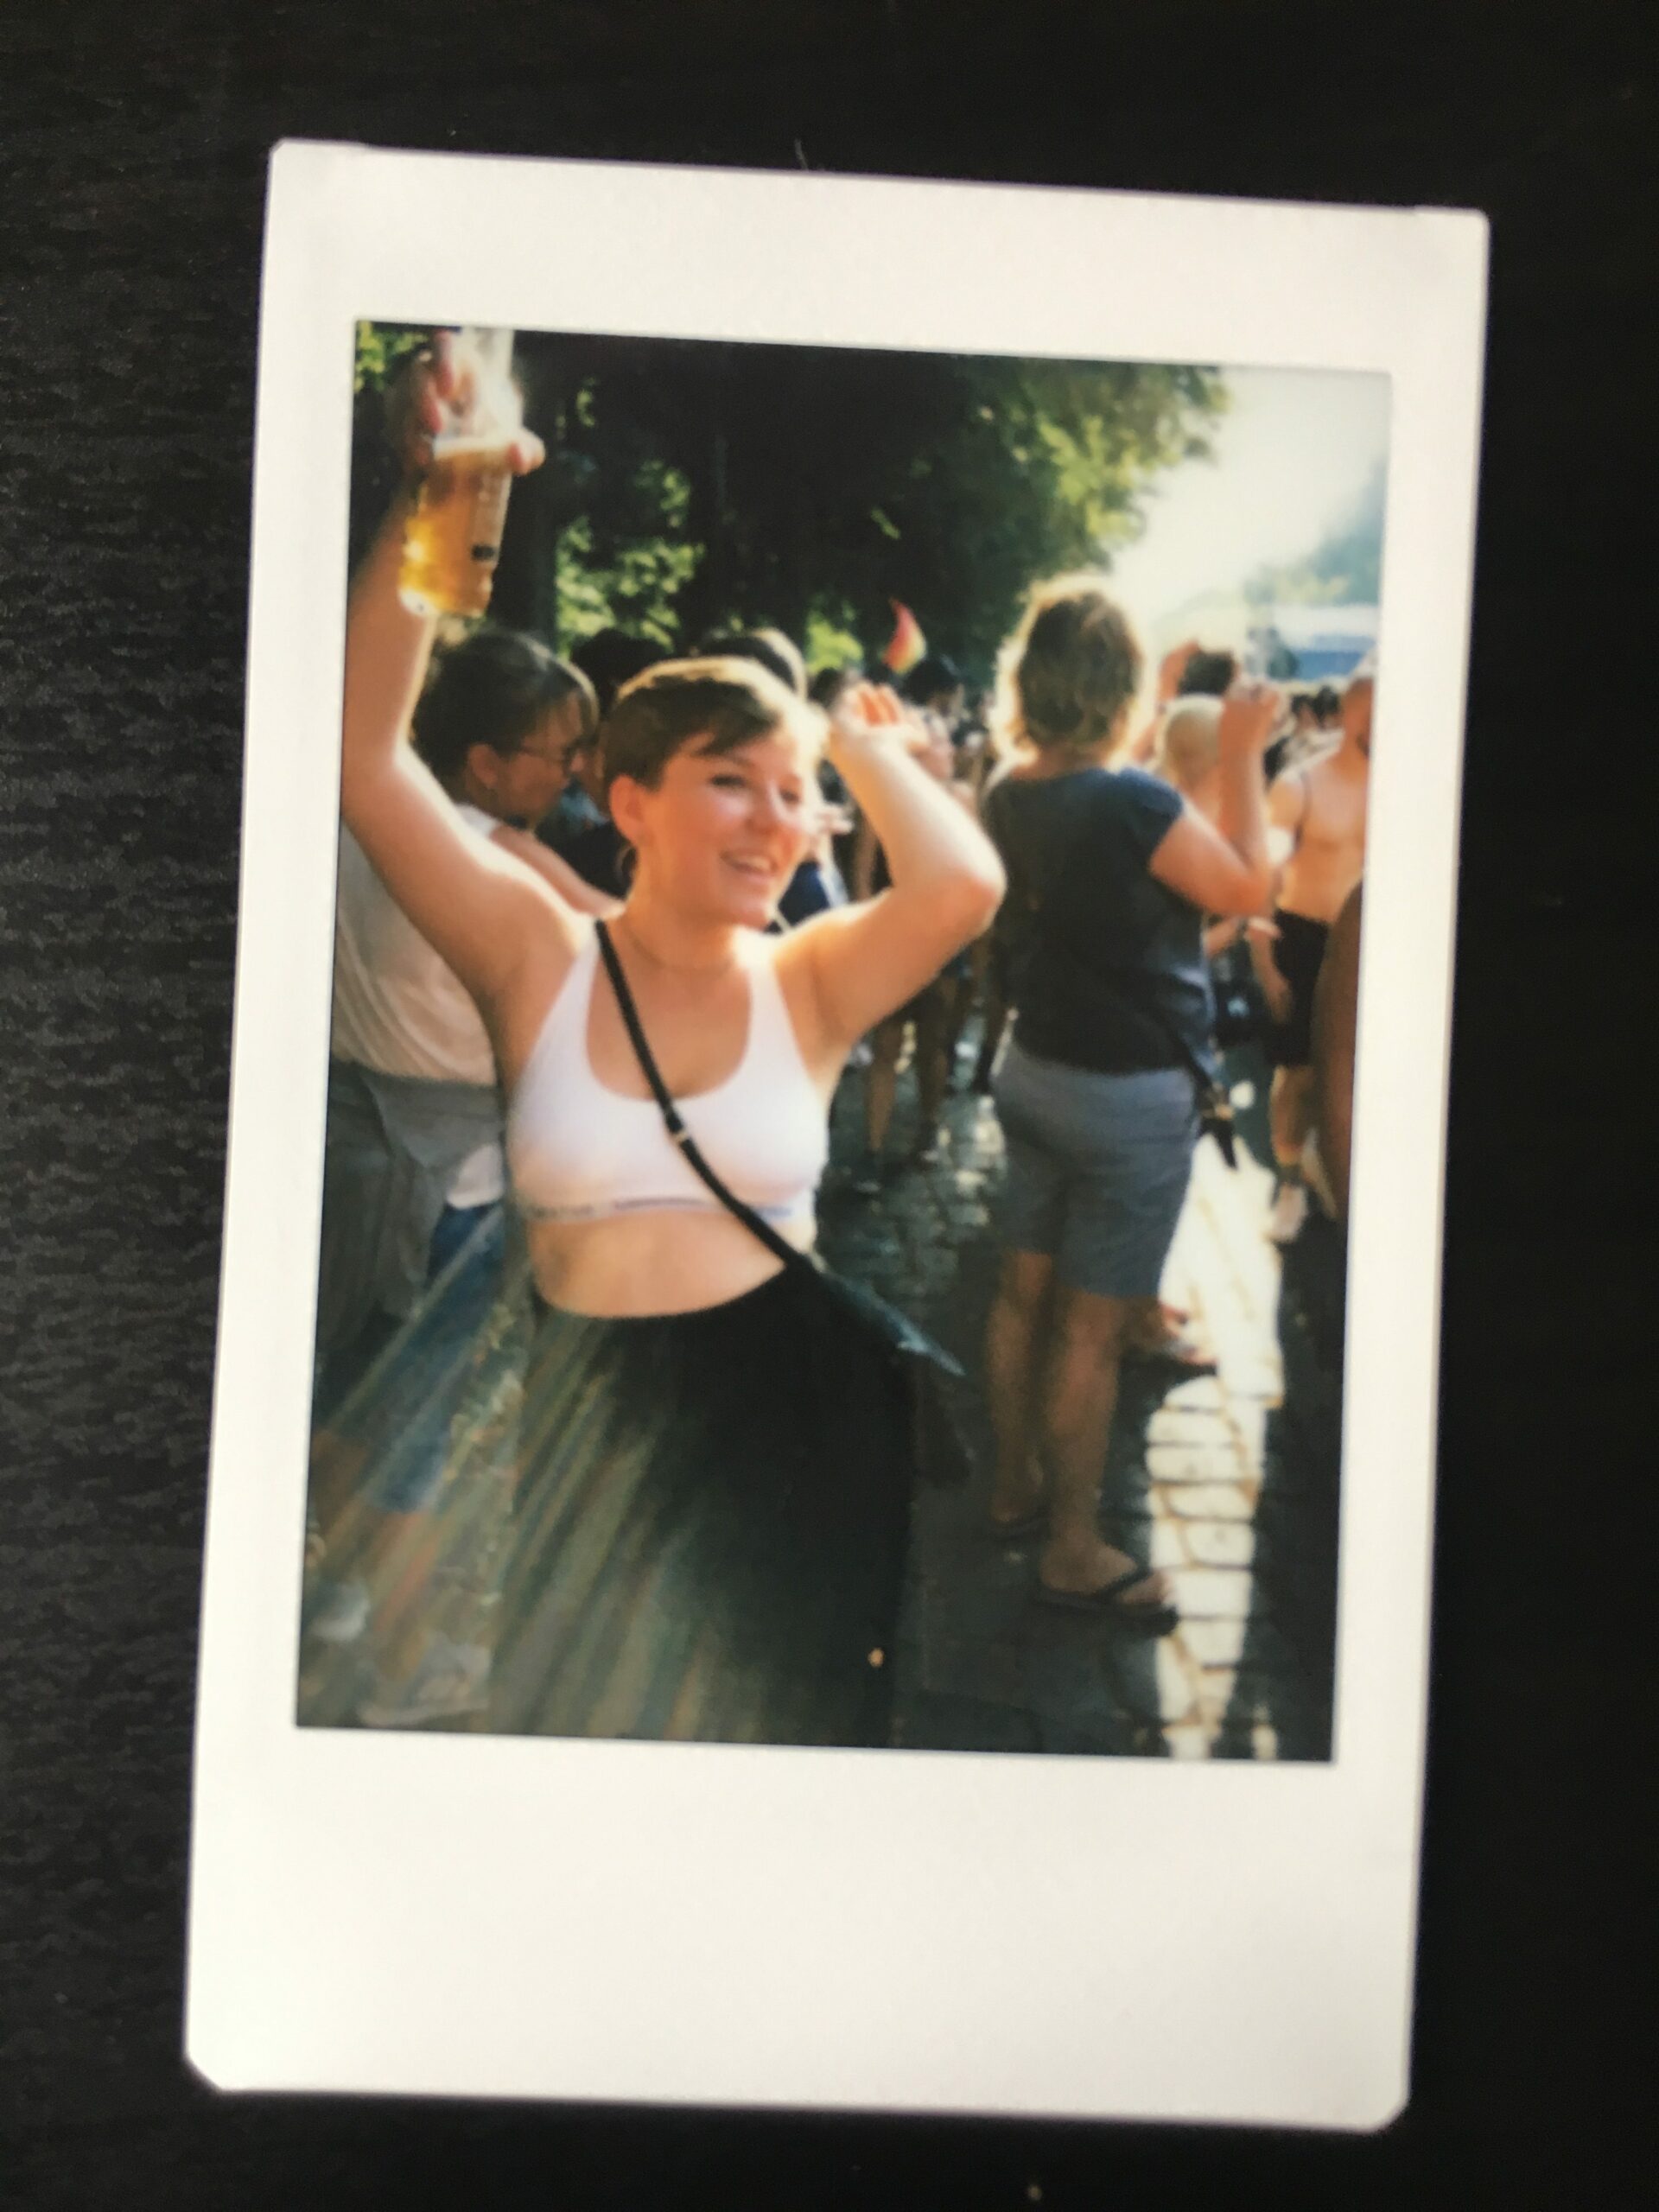 Berlin, Remember Stonewall: The Parade in Polaroid